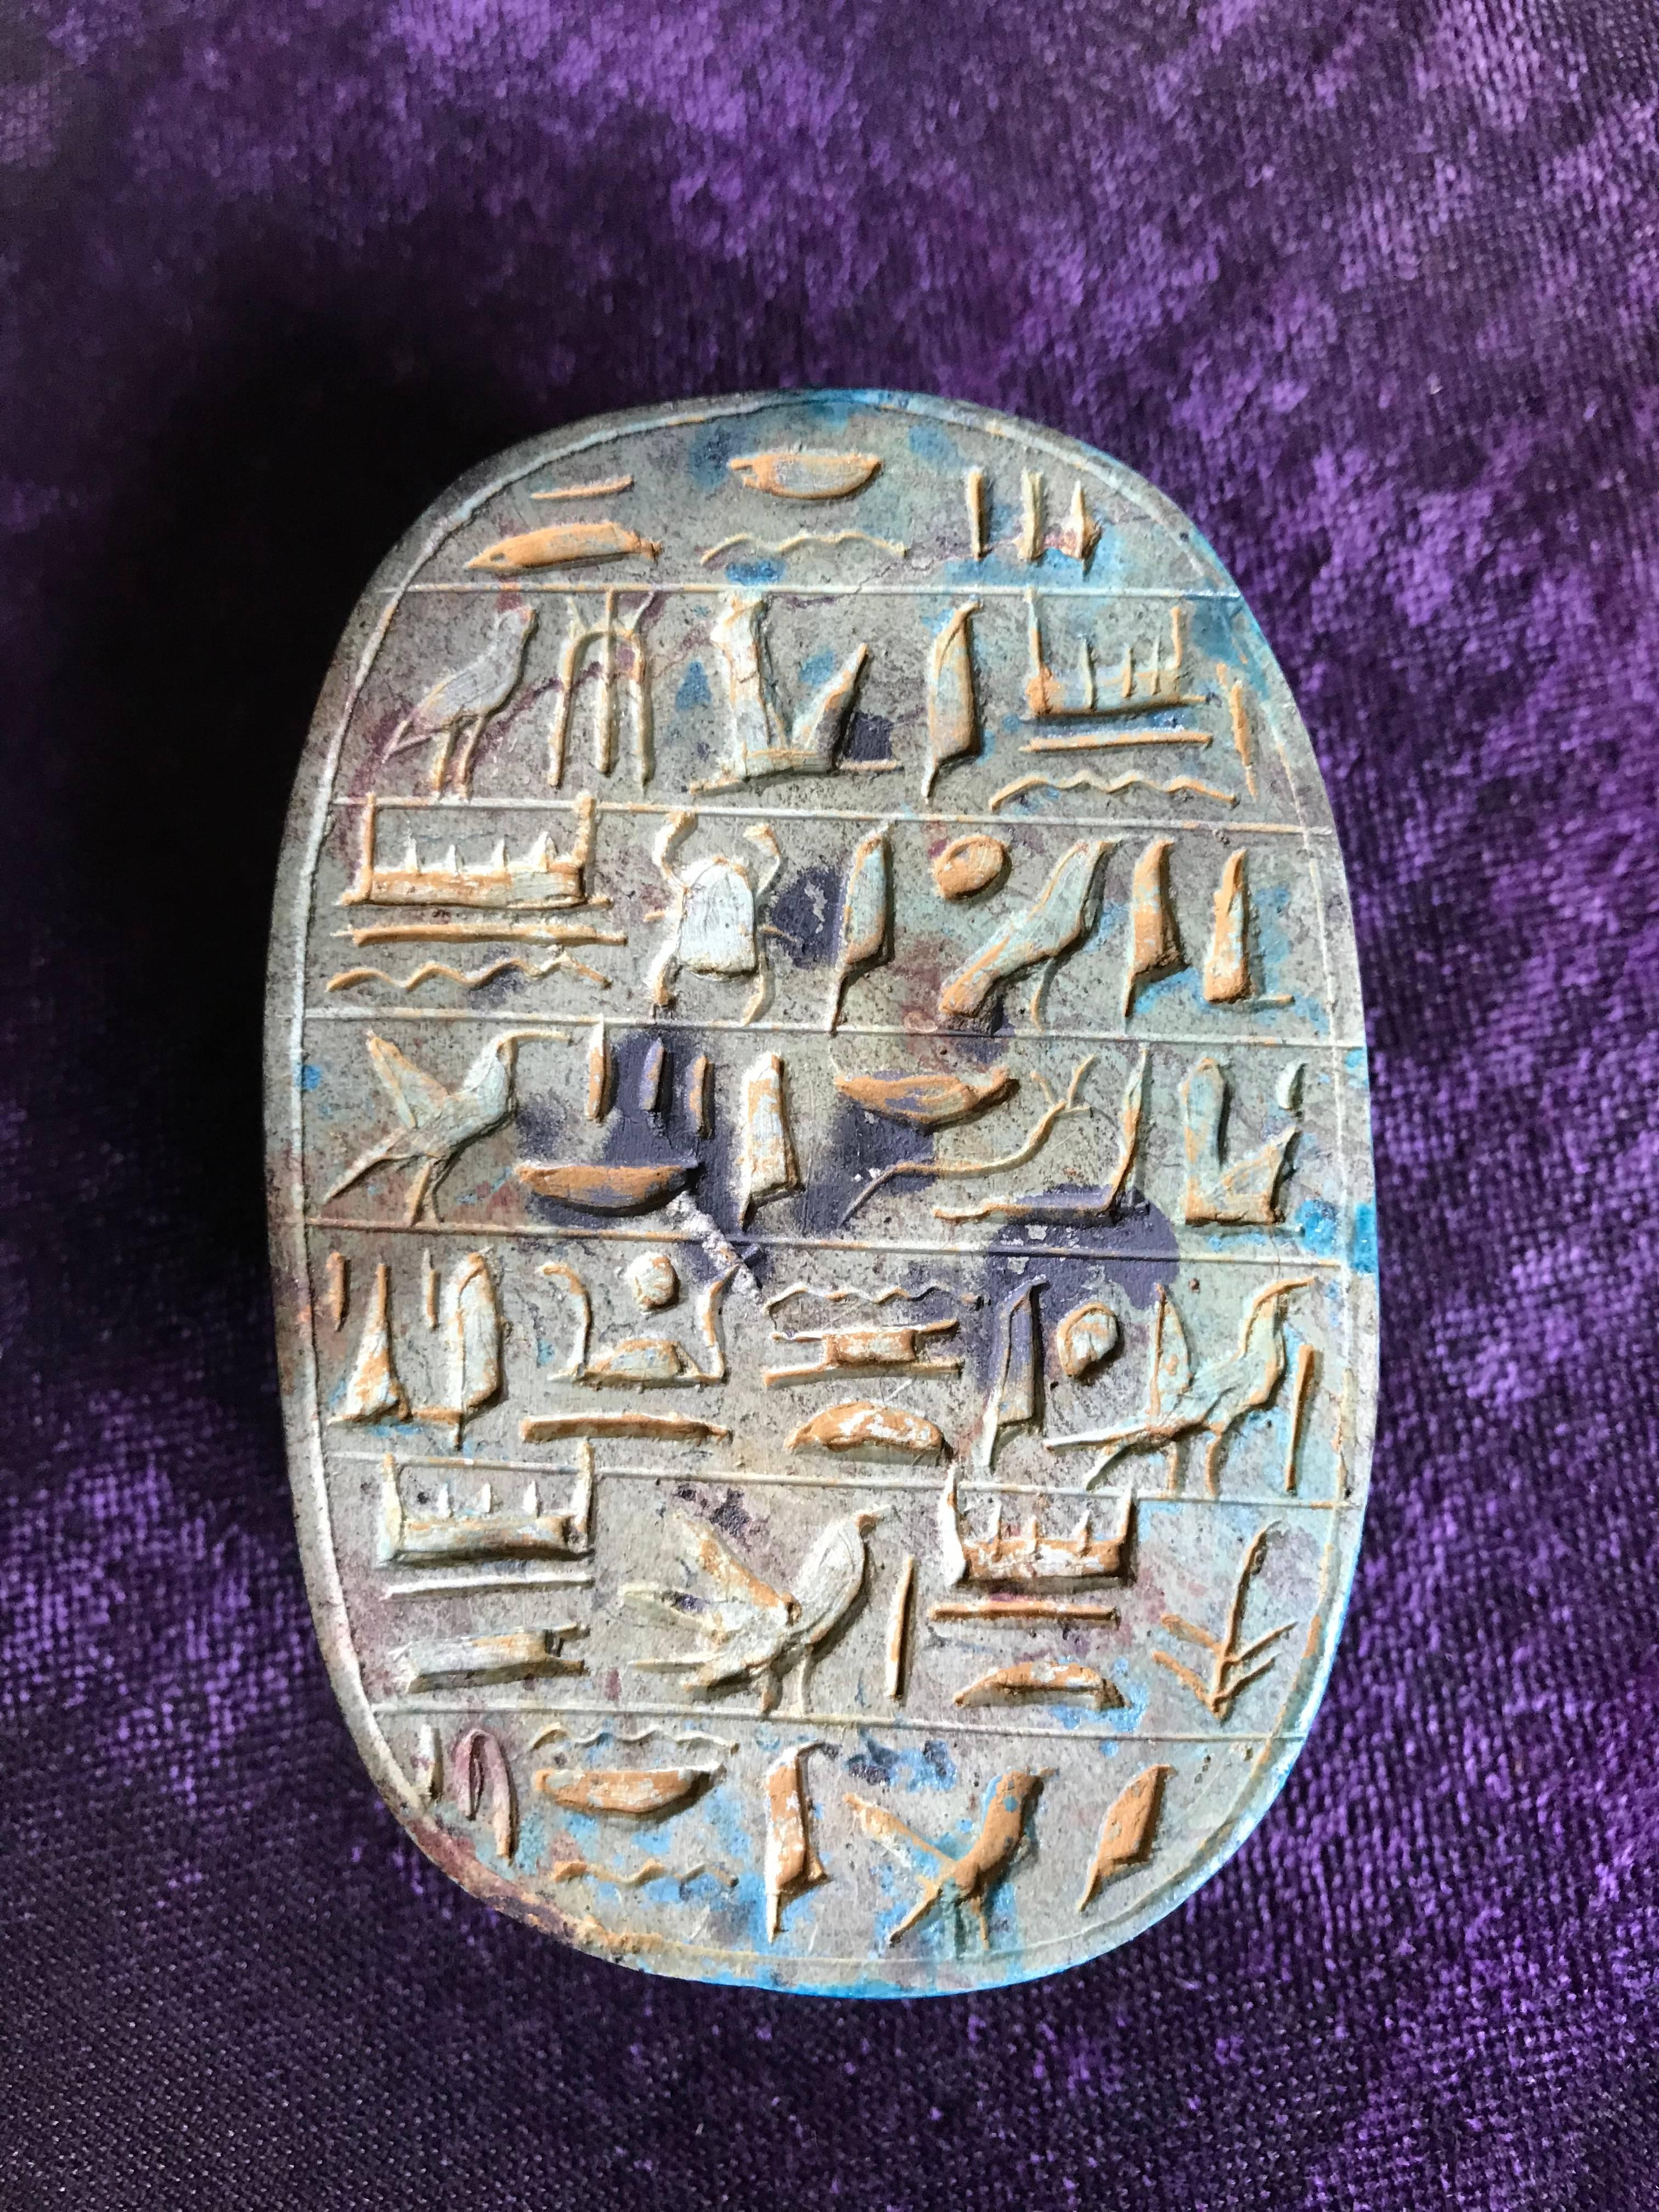 Beautifully realized Egyptian faience scarab with turquoise glaze in the ancient style, Grand Tour period, late 19th century. The open-work scarab beetle shown with twin cobras on the back. The bottom inscribed with hieroglyphics, probably lines